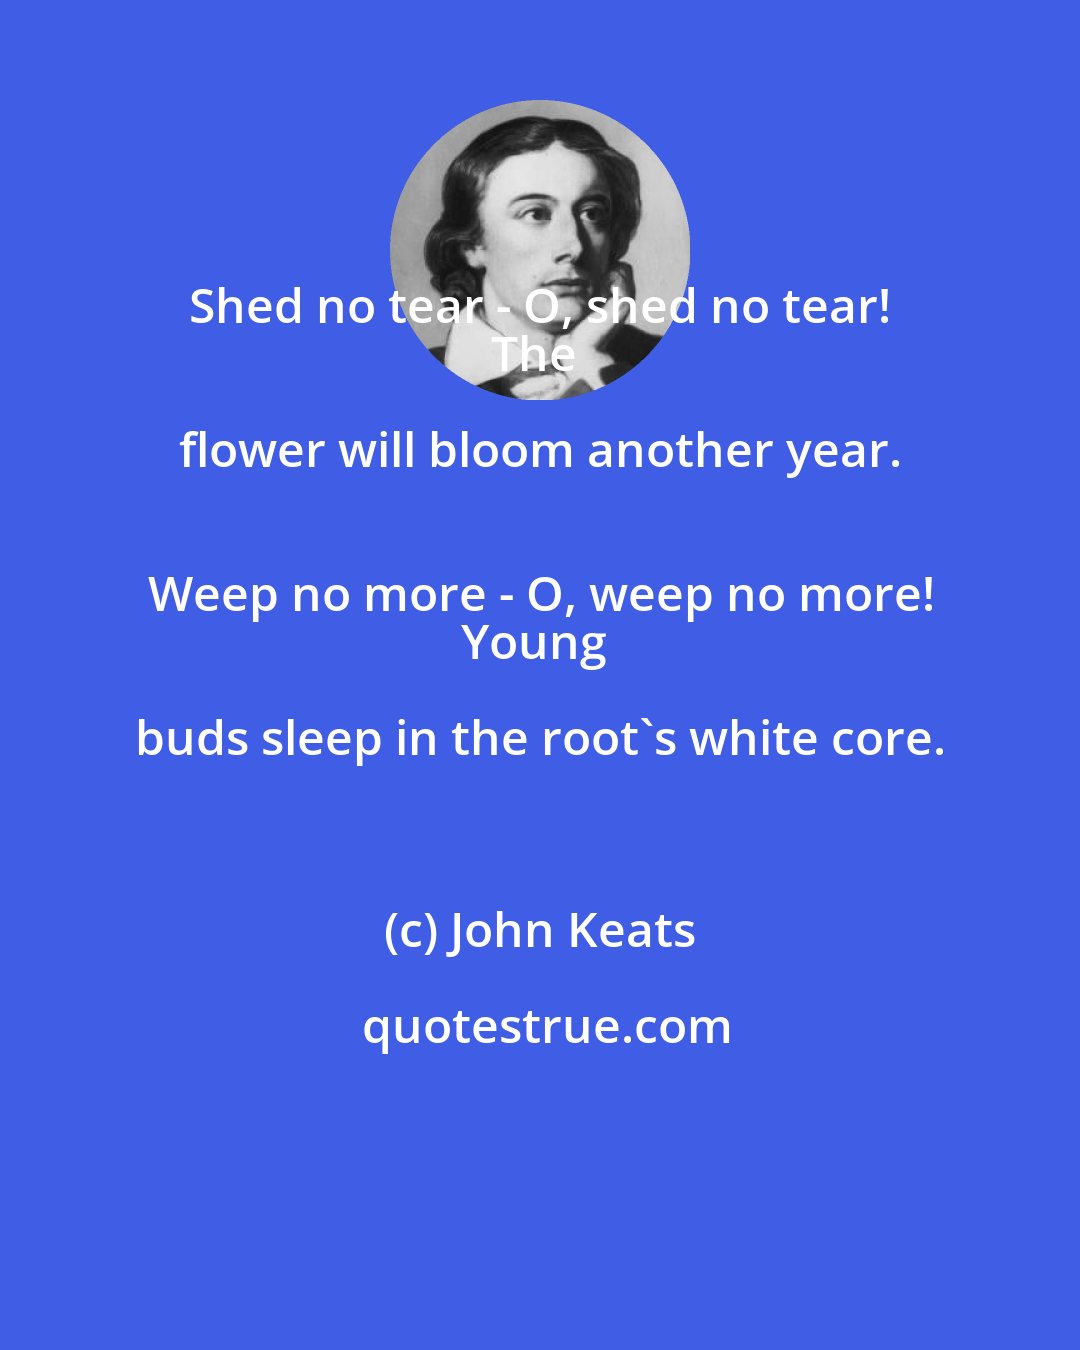 John Keats: Shed no tear - O, shed no tear! 
The flower will bloom another year. 
Weep no more - O, weep no more!
Young buds sleep in the root's white core.